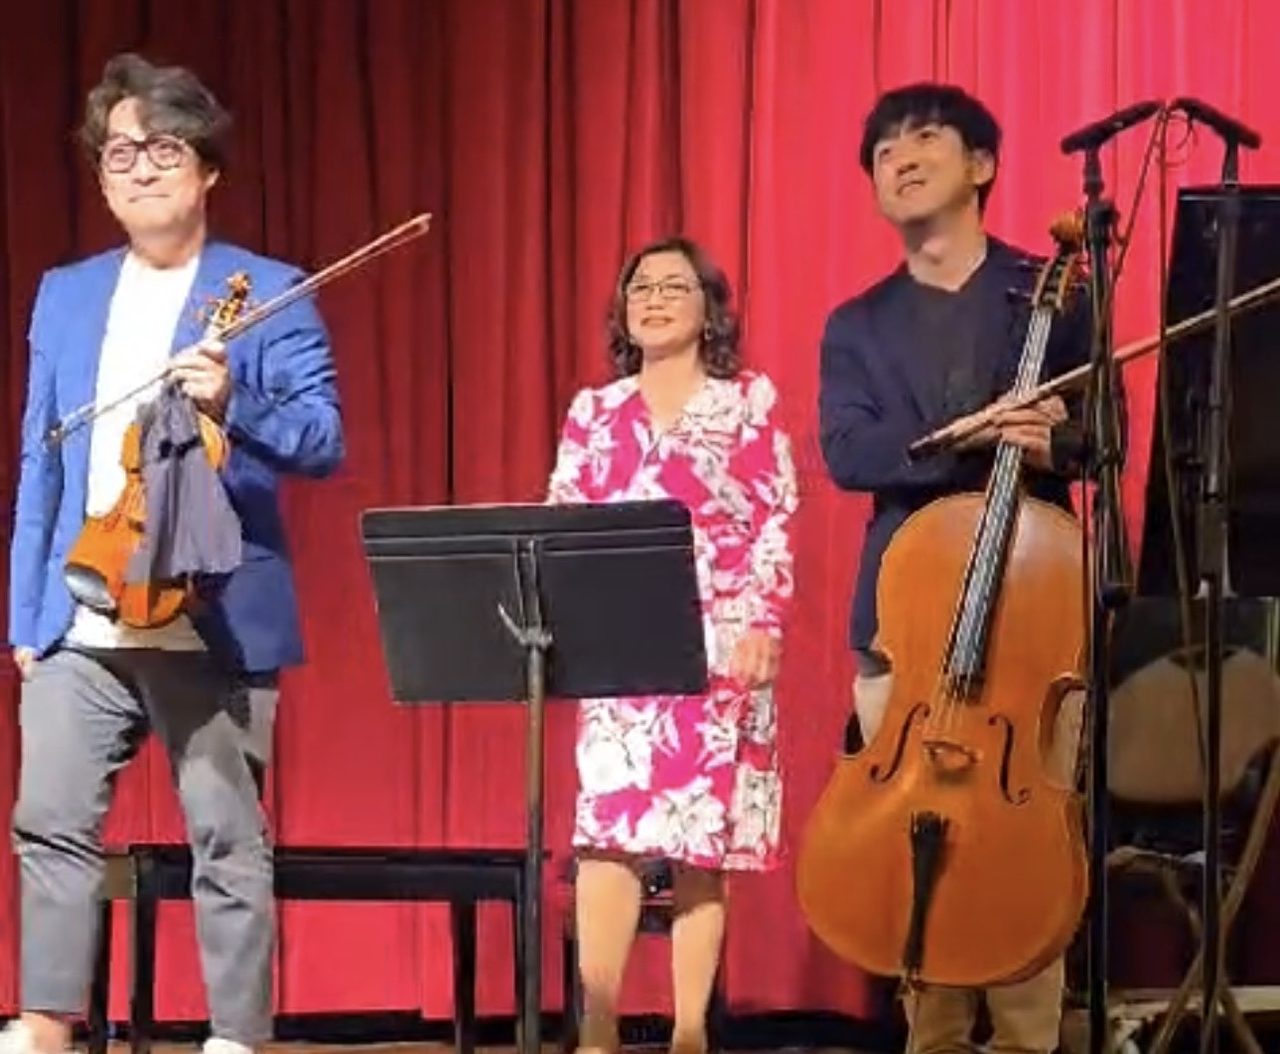 Pianist Huang Yongyu honored at California Music Teachers Association Conference and Asian American International Music Works Conference